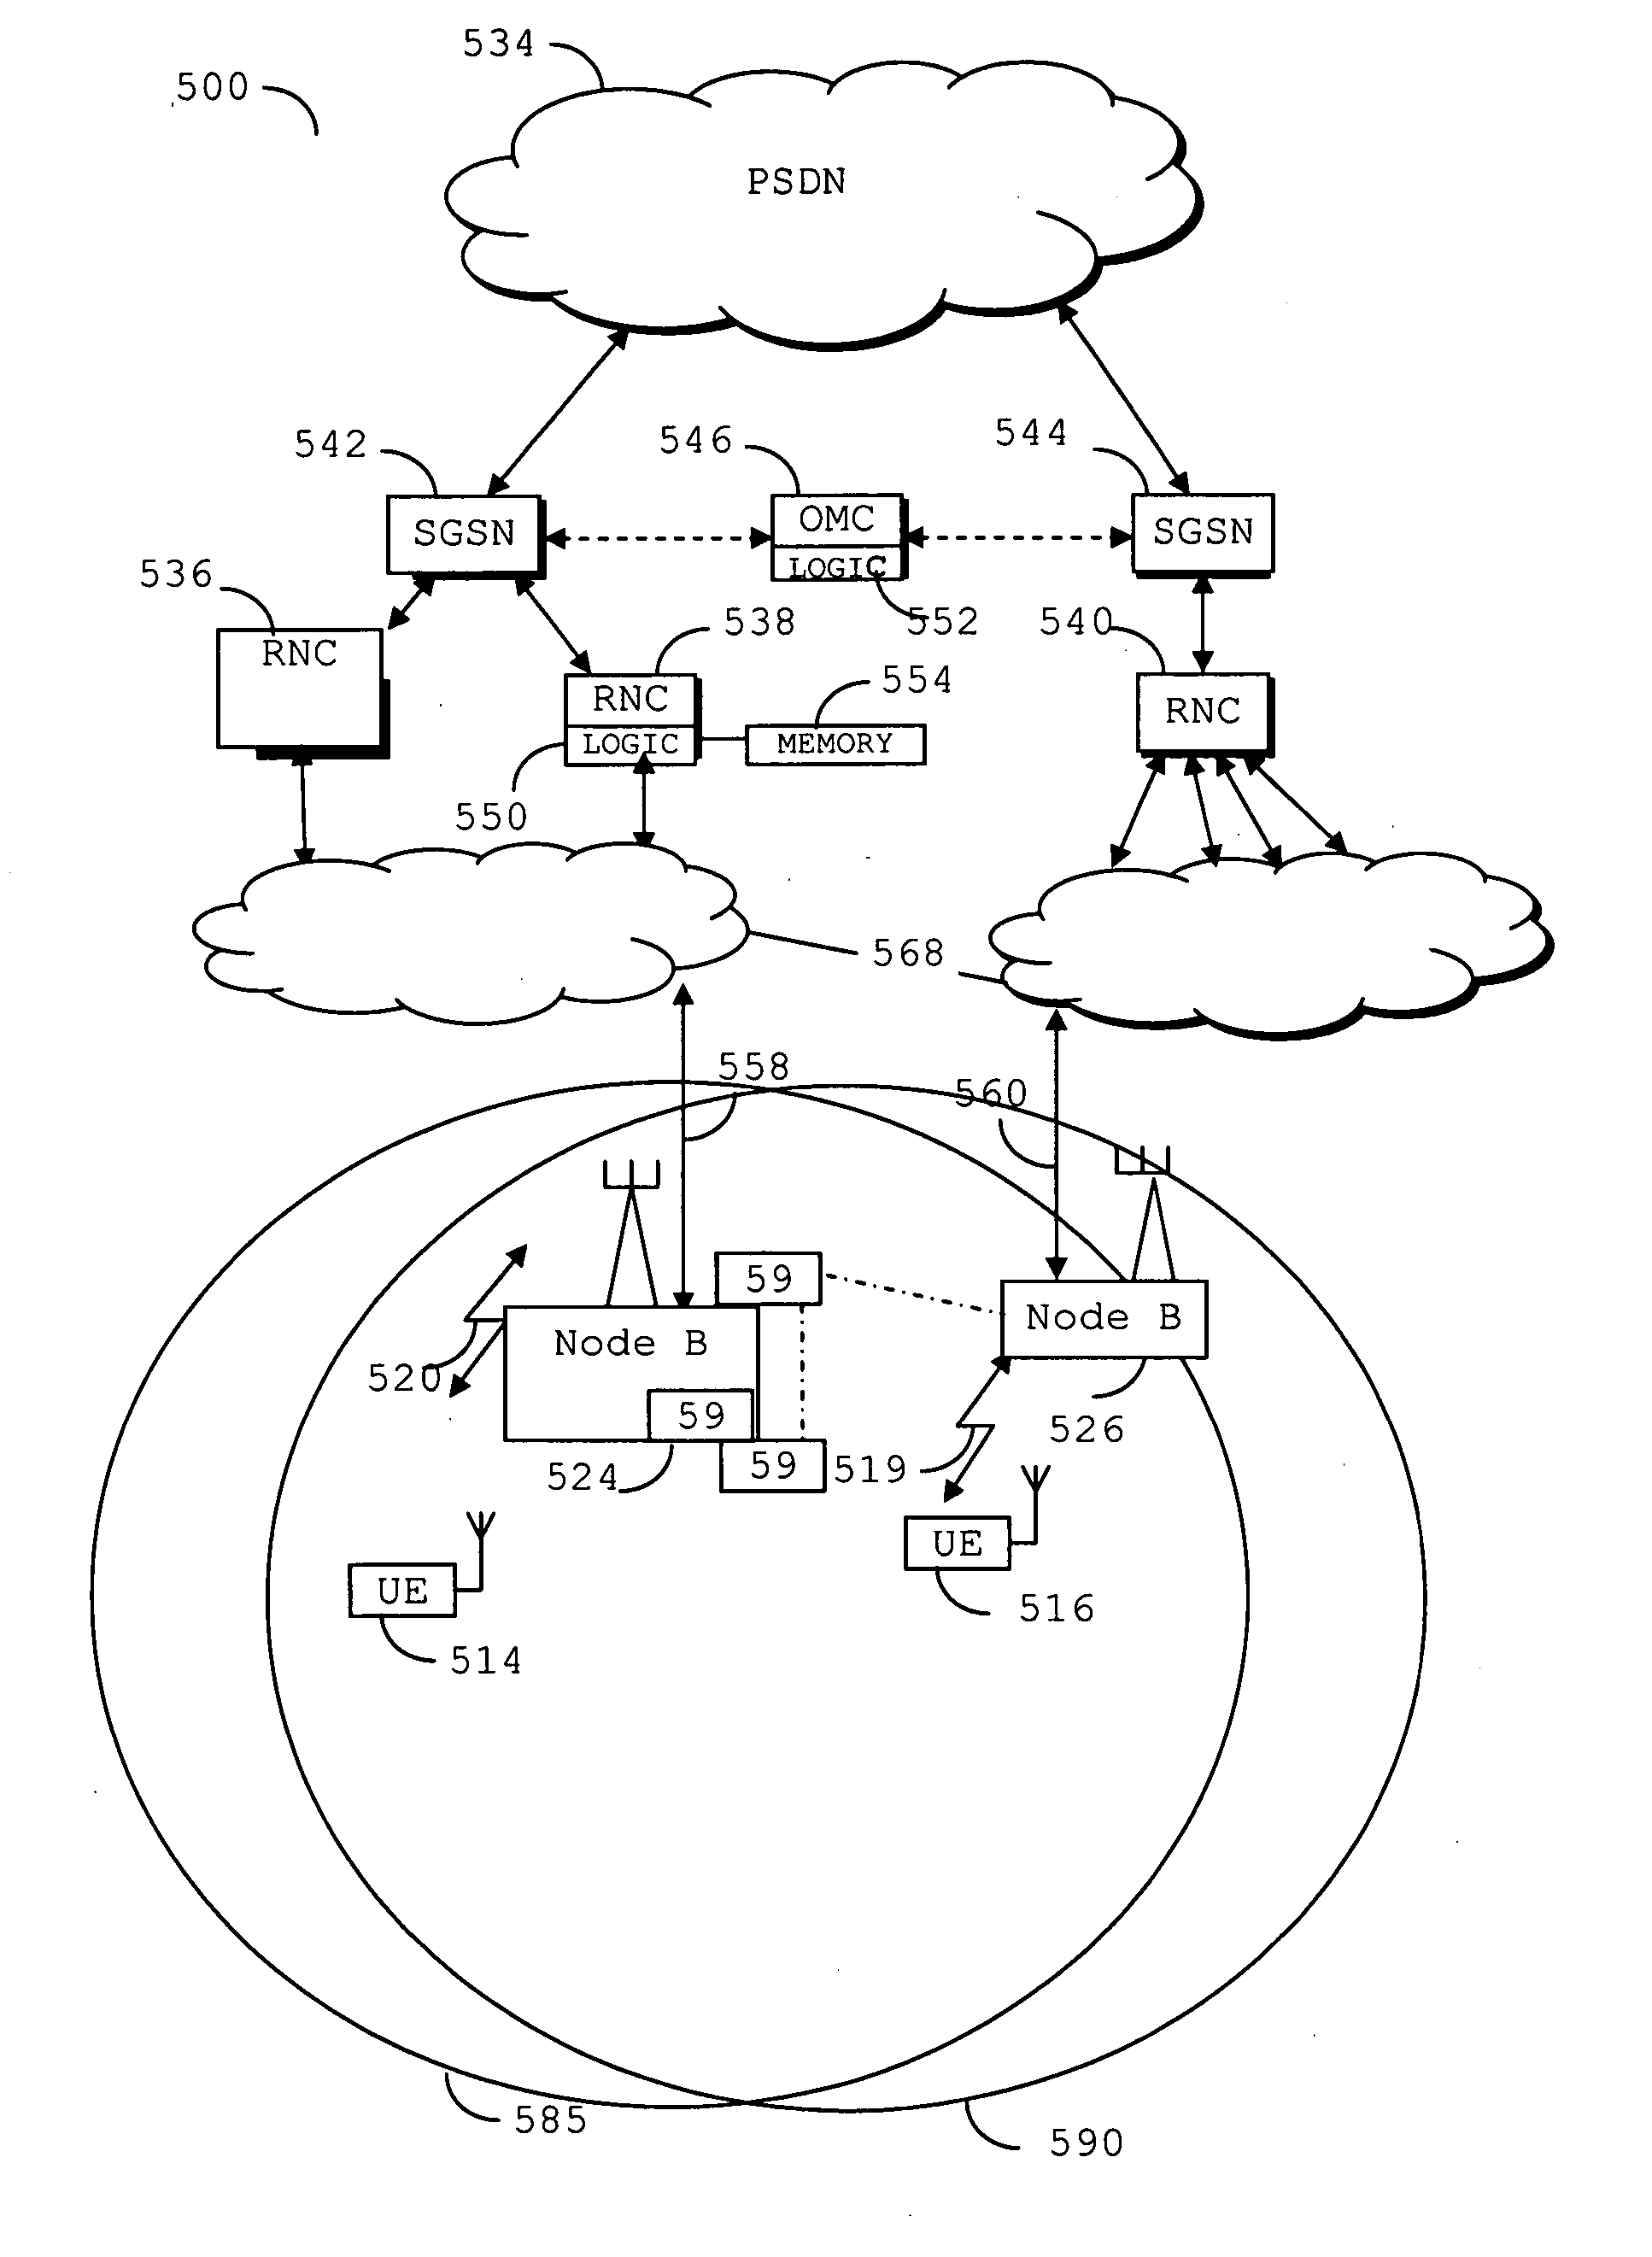 Cellular communication system and method for coexistence of dissimilar systems